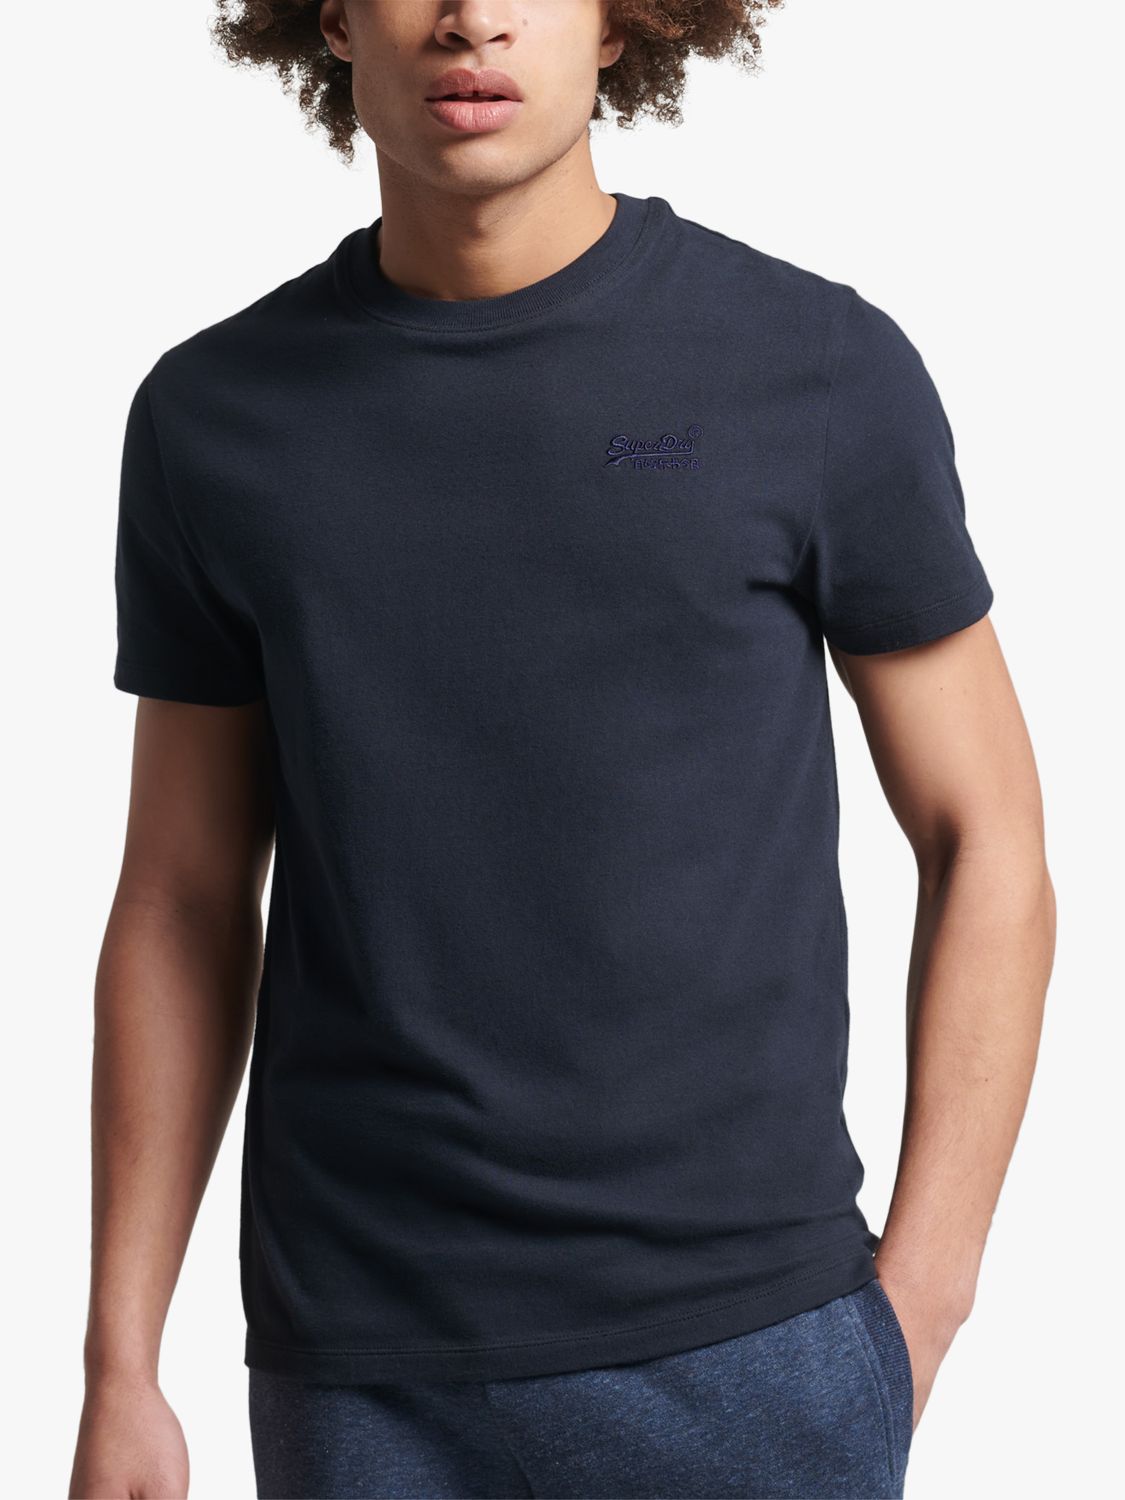 Superdry Organic Cotton Vintage Logo John at Eclipse T-Shirt, Lewis Partners & Embroidered Navy